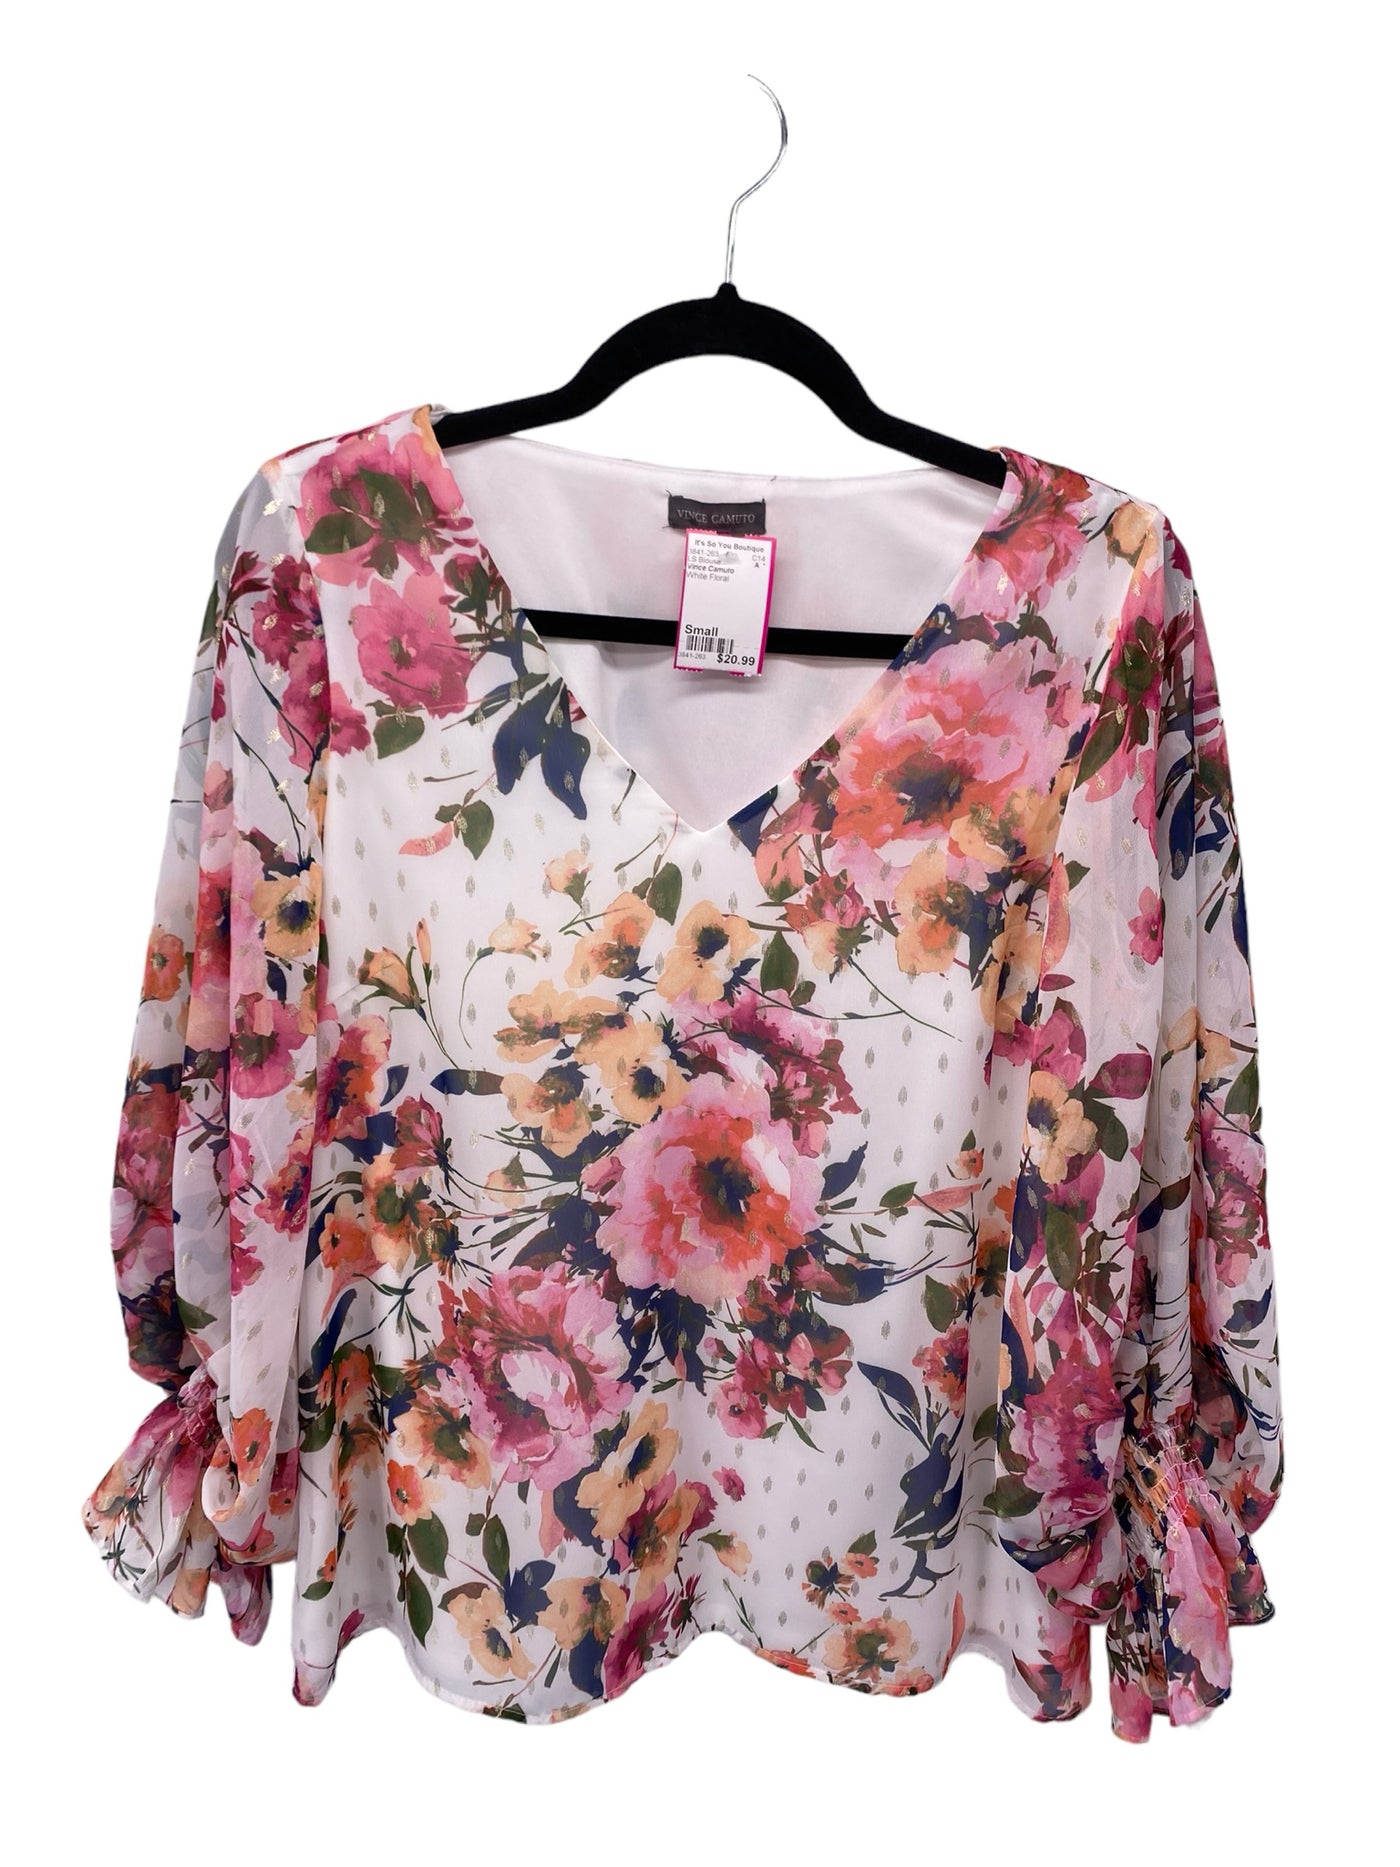 Vince Camuto Misses Size Small White Floral LS Blouse